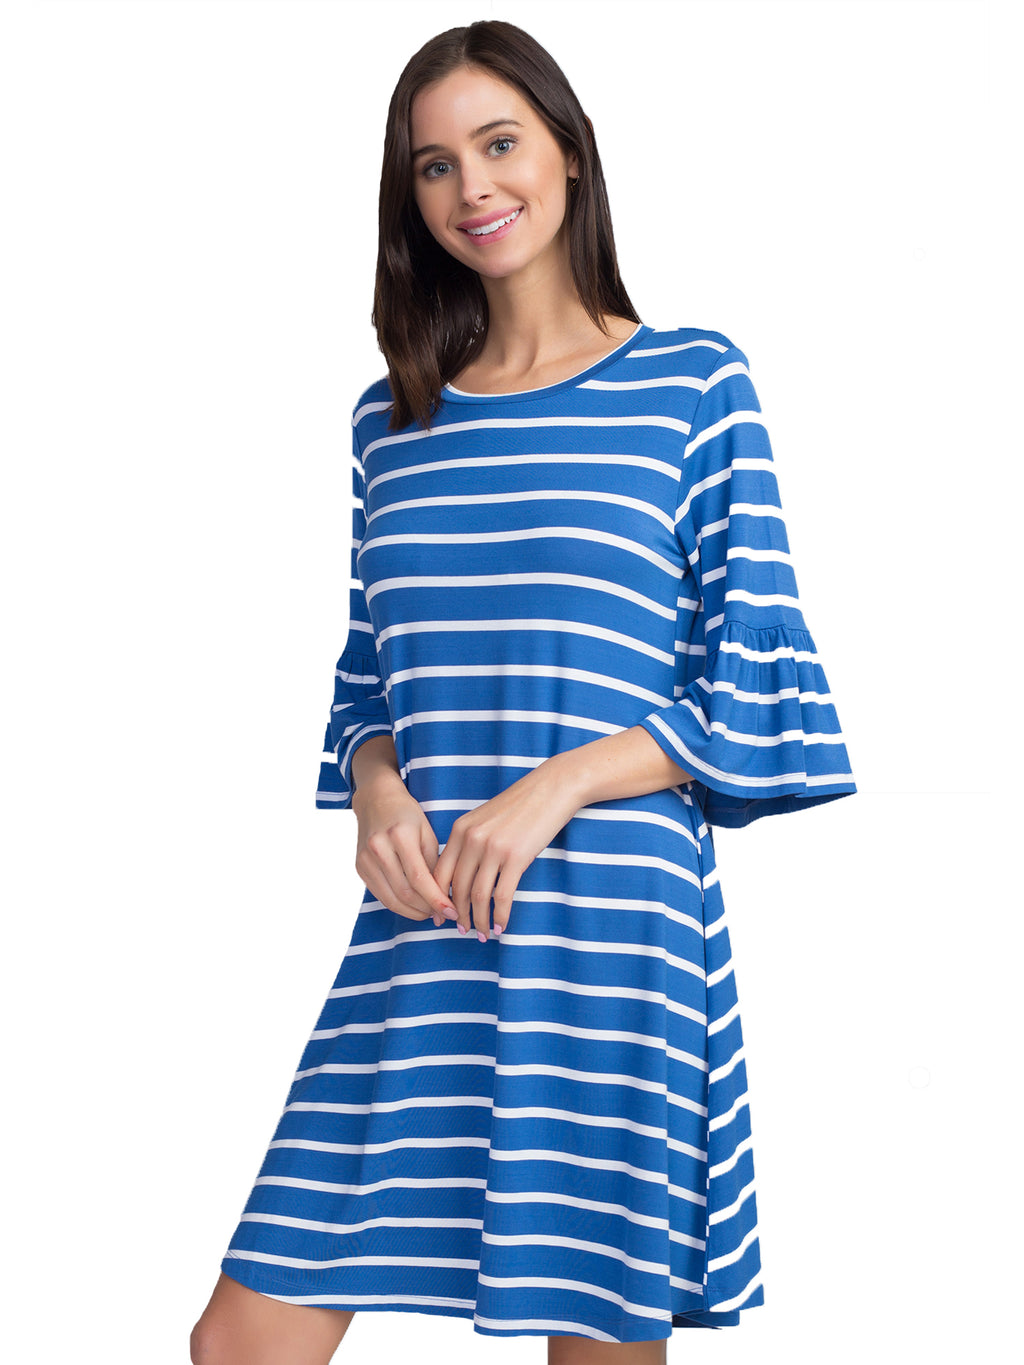 Blue & White Striped Womens Relaxed Fit Dress